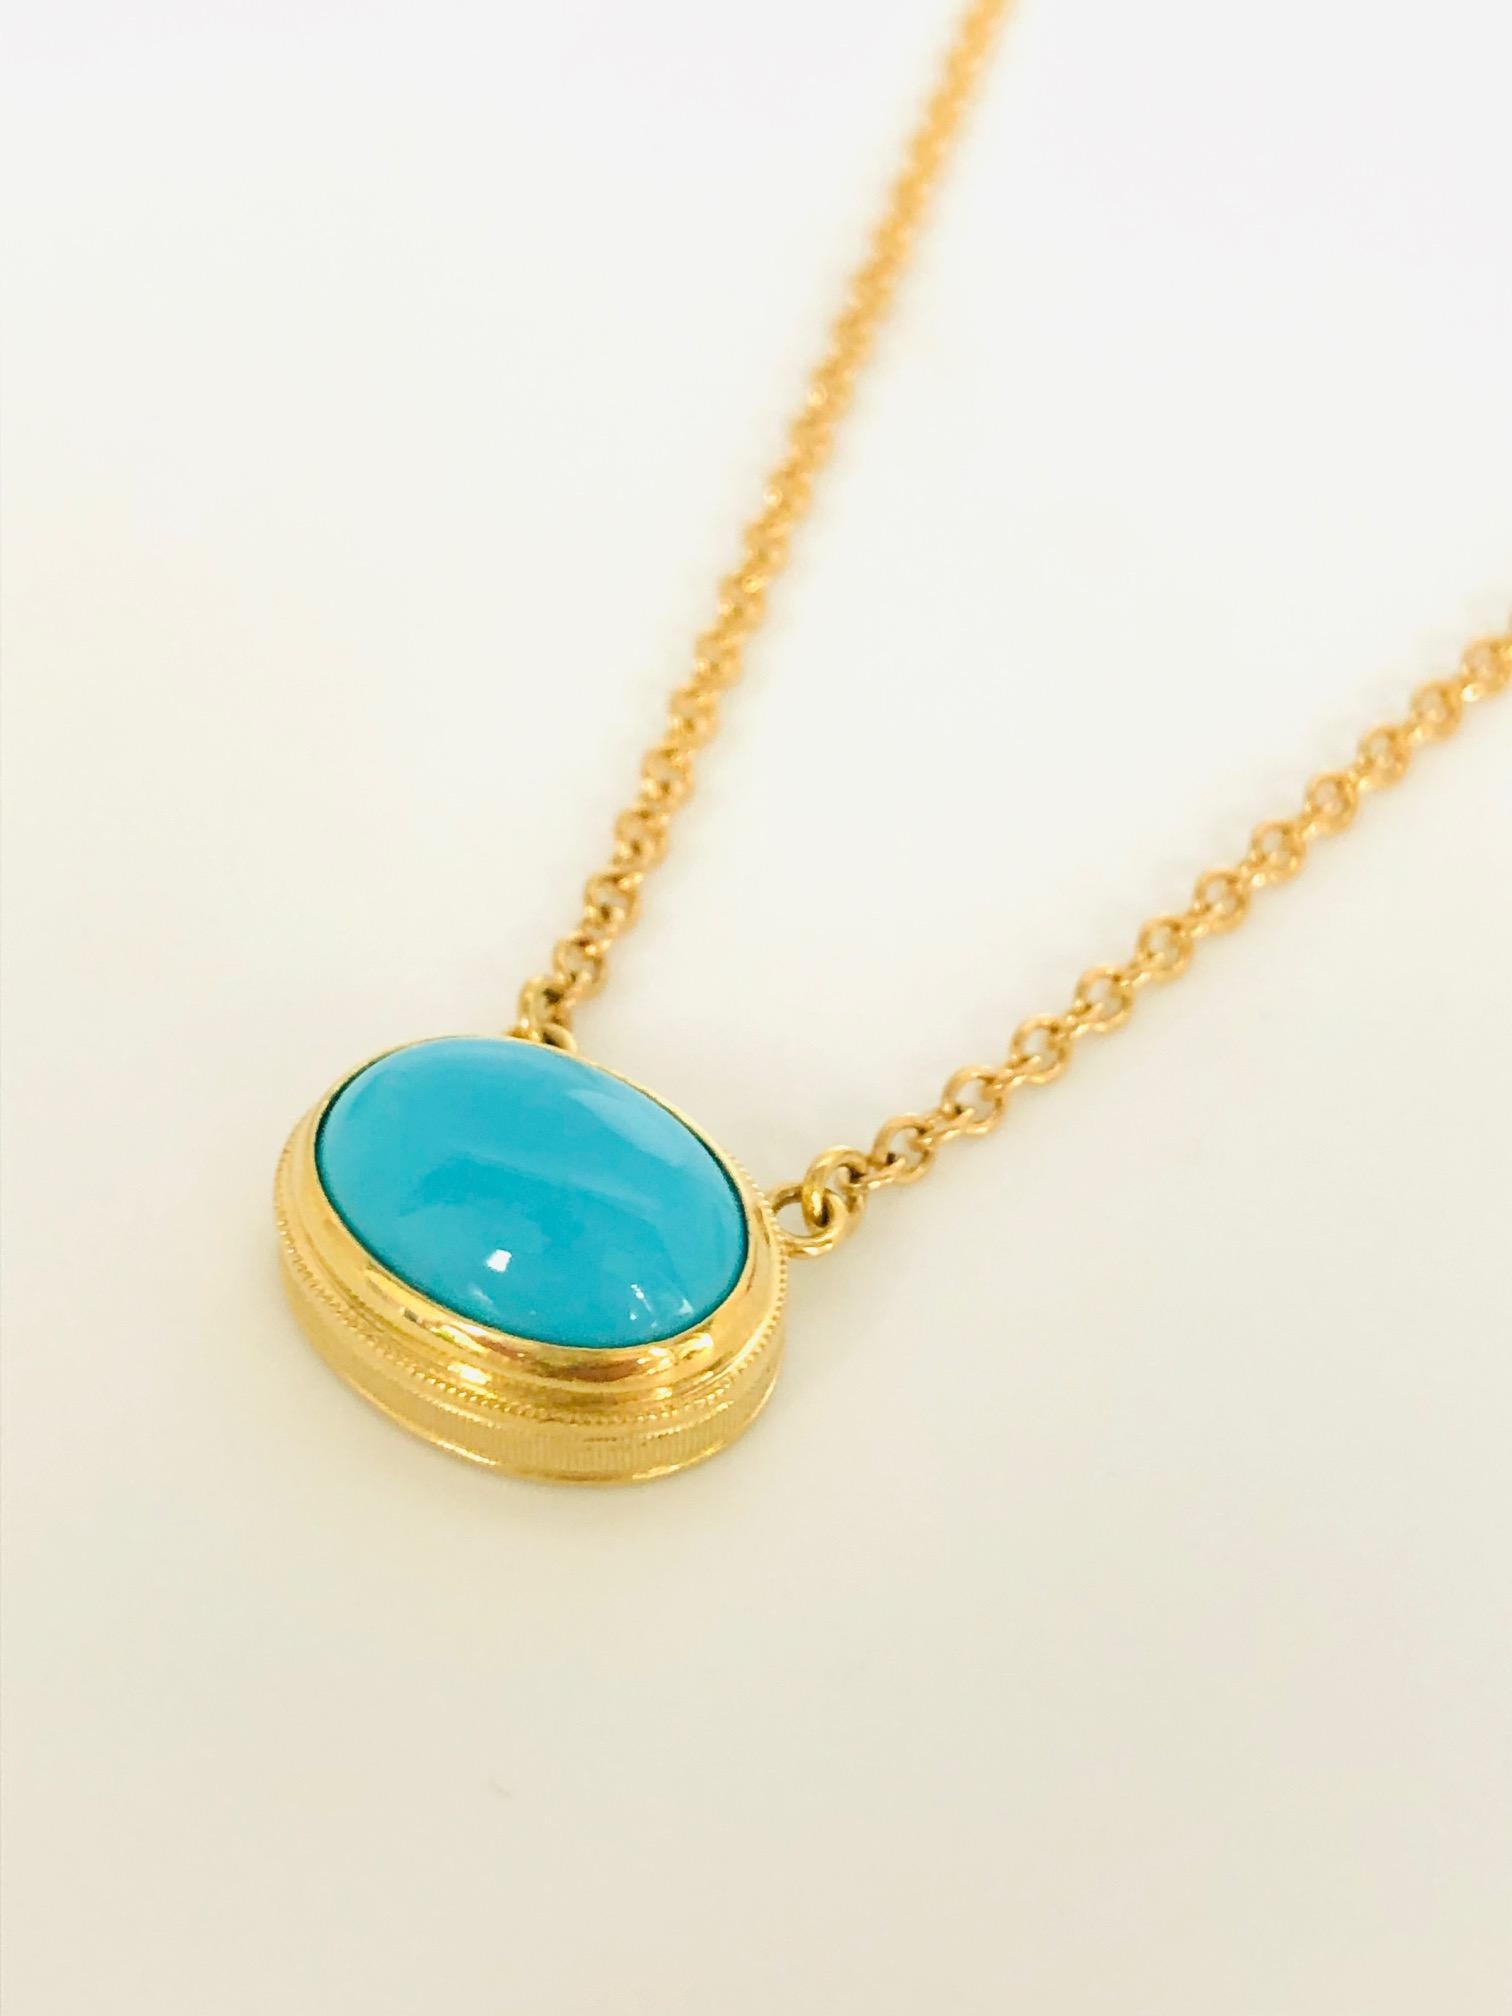 The “robin’s egg blue” color of the turquoise cabochon featured in this necklace represents the finest quality money can buy. This bezel-set 6.79 carat gem is from the Sleeping Beauty Mine, whose reputation for high quality is legendary. Handcrafted